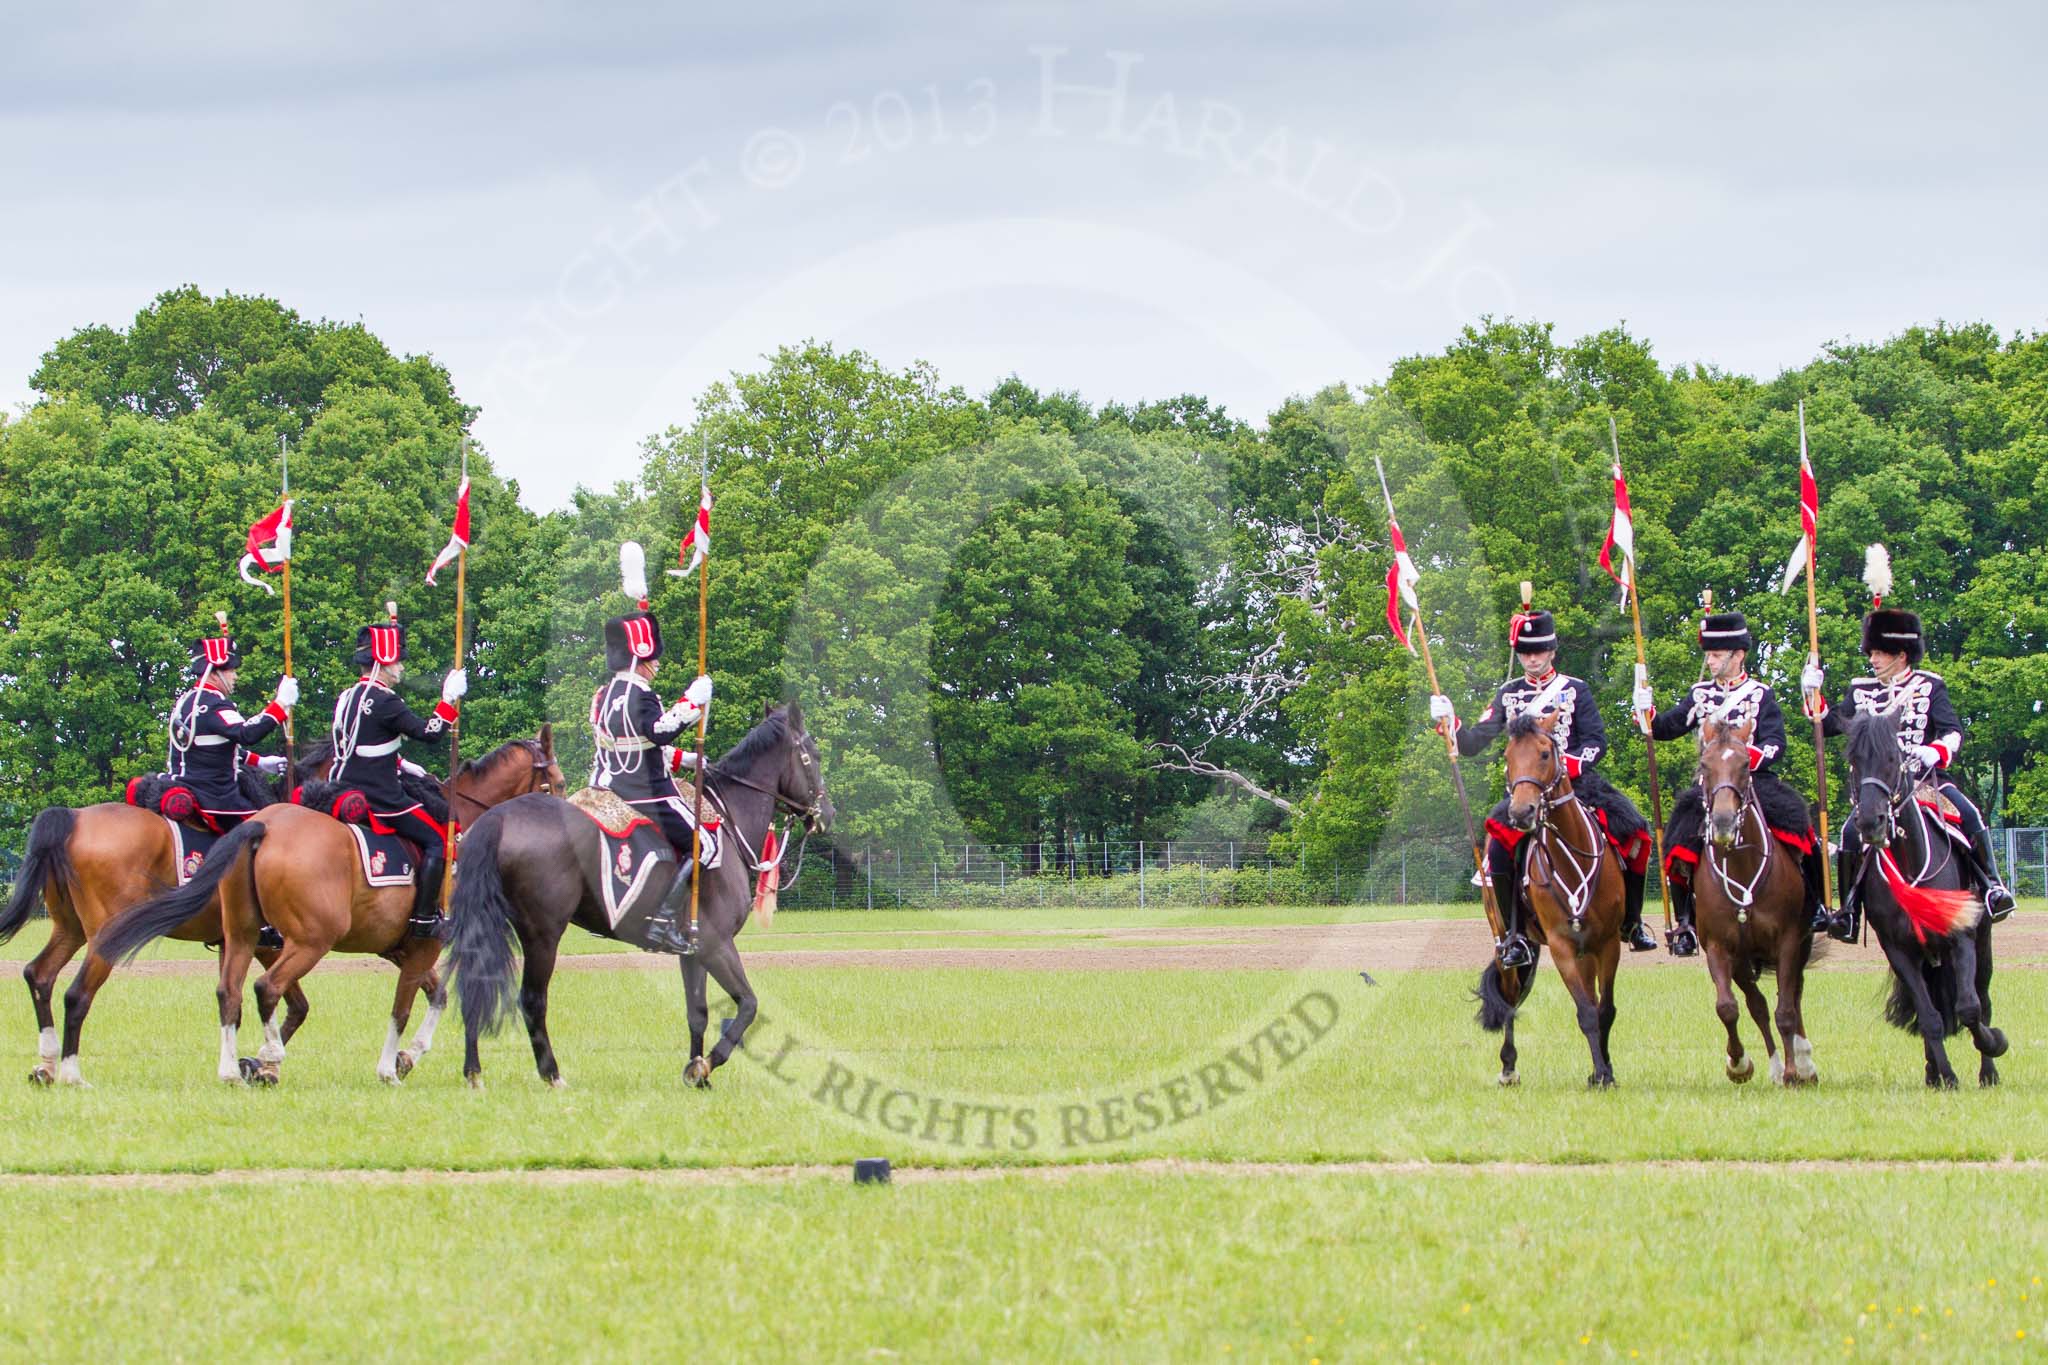 The Light Cavalry HAC Annual Review and Inspection 2013.
Windsor Great Park Review Ground,
Windsor,
Berkshire,
United Kingdom,
on 09 June 2013 at 14:32, image #534